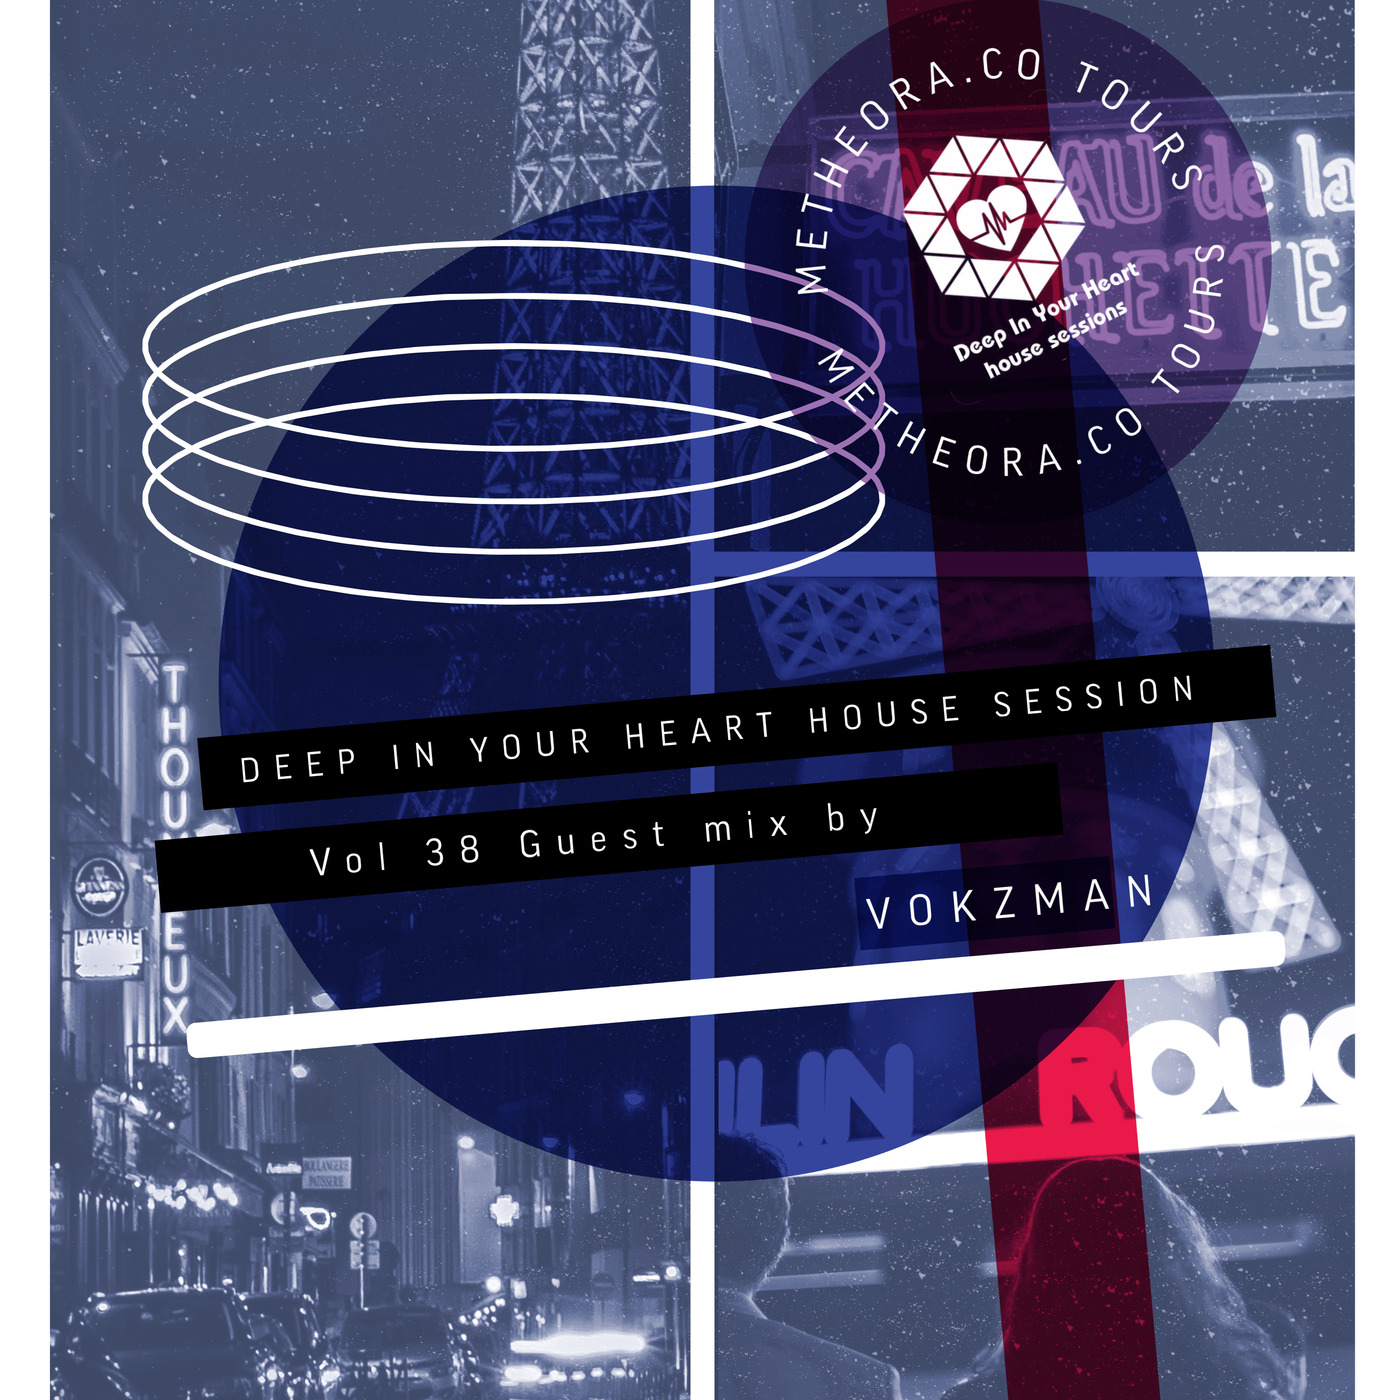 DEEP IN YOUR HEART house sessions vol 38 guest mix by Vokzman